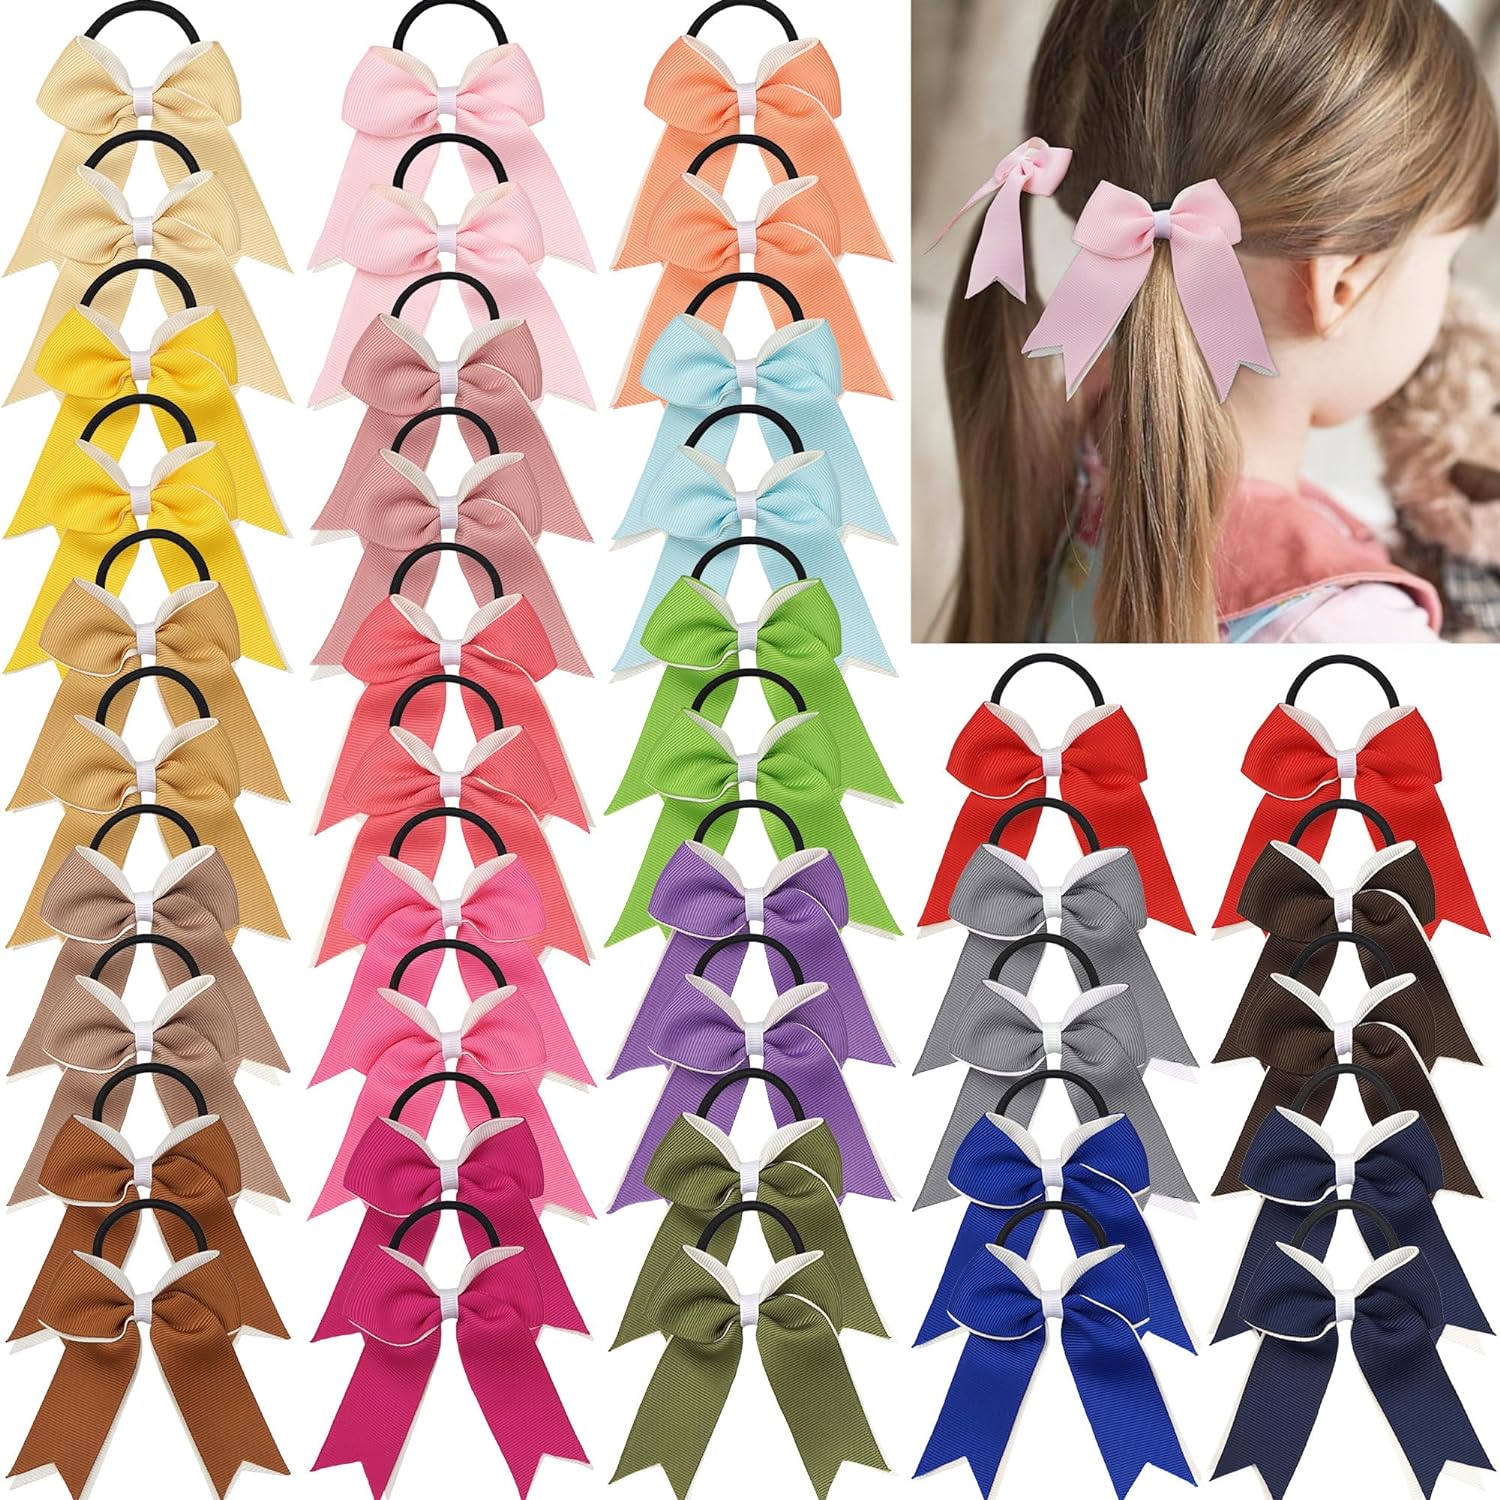 WillingTee 20Pcs 8 Large Cheer Bows for Girls Ponytail Holder Grosgrain  Ribbon Cheerleading Bows Elastic Hair Tie Bands for Baby Girls School